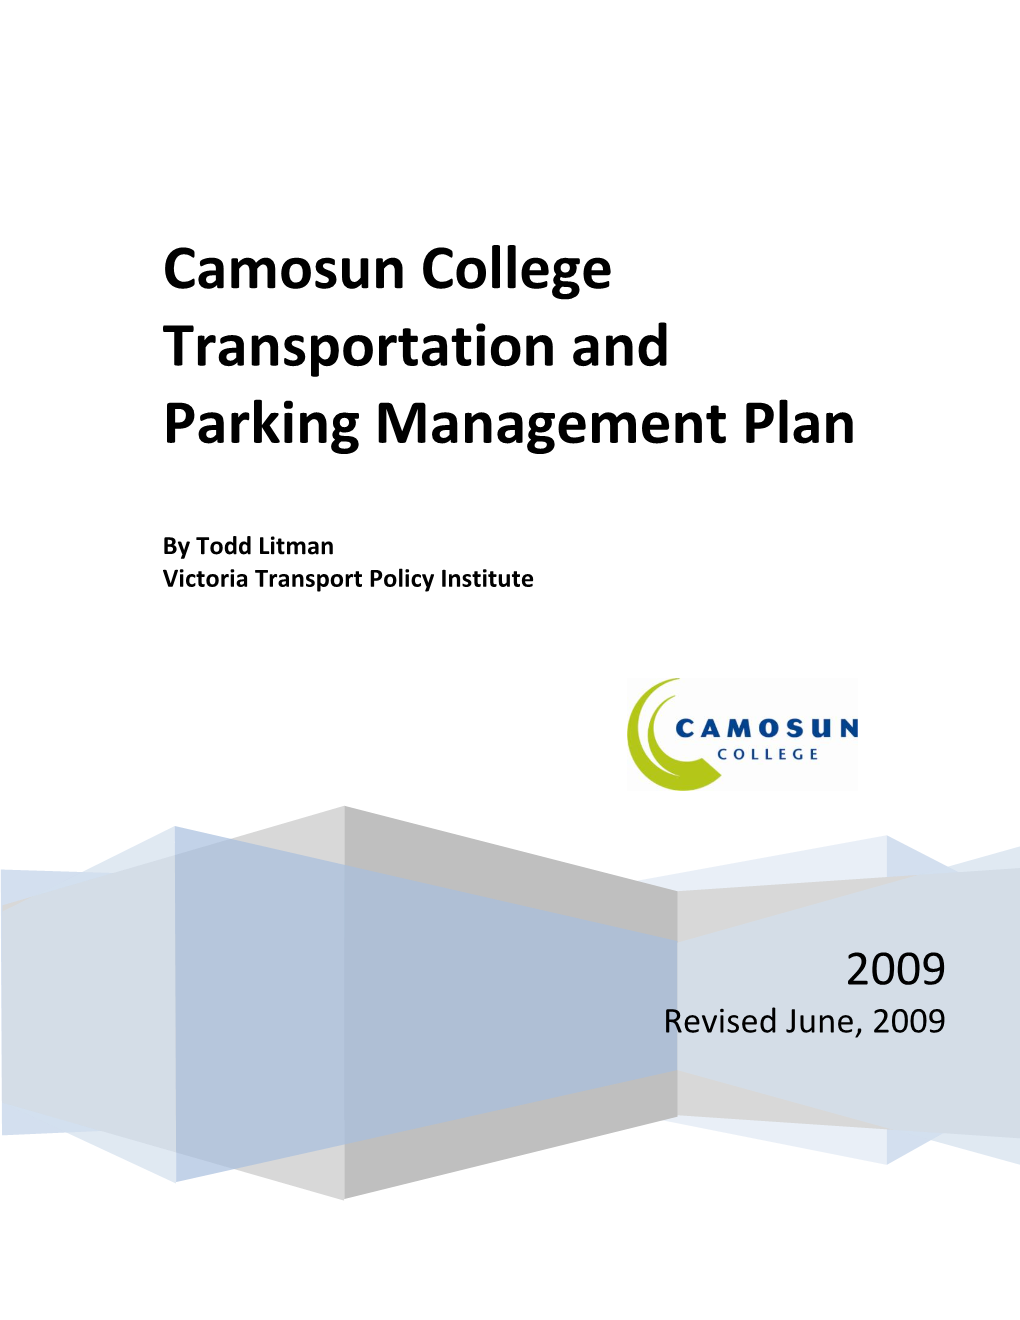 Camosun College Transportation and Parking Management Plan